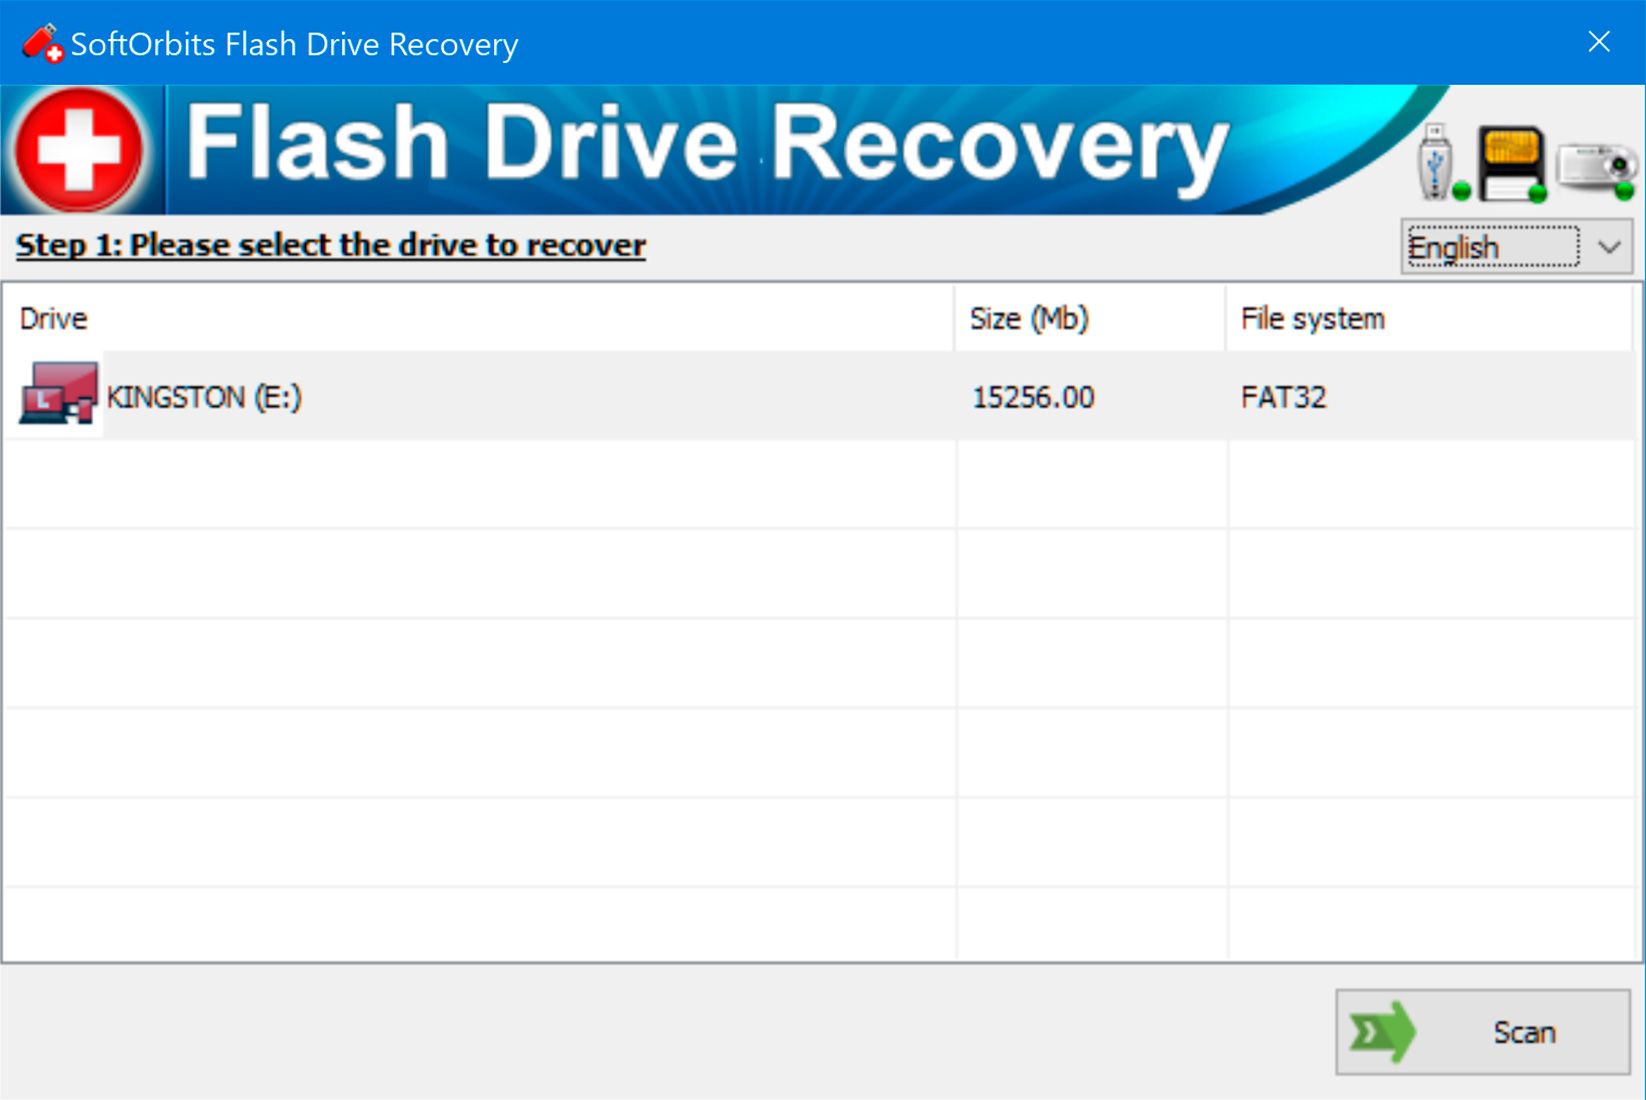 Launch SoftOrbits Flash Drive Recovery..